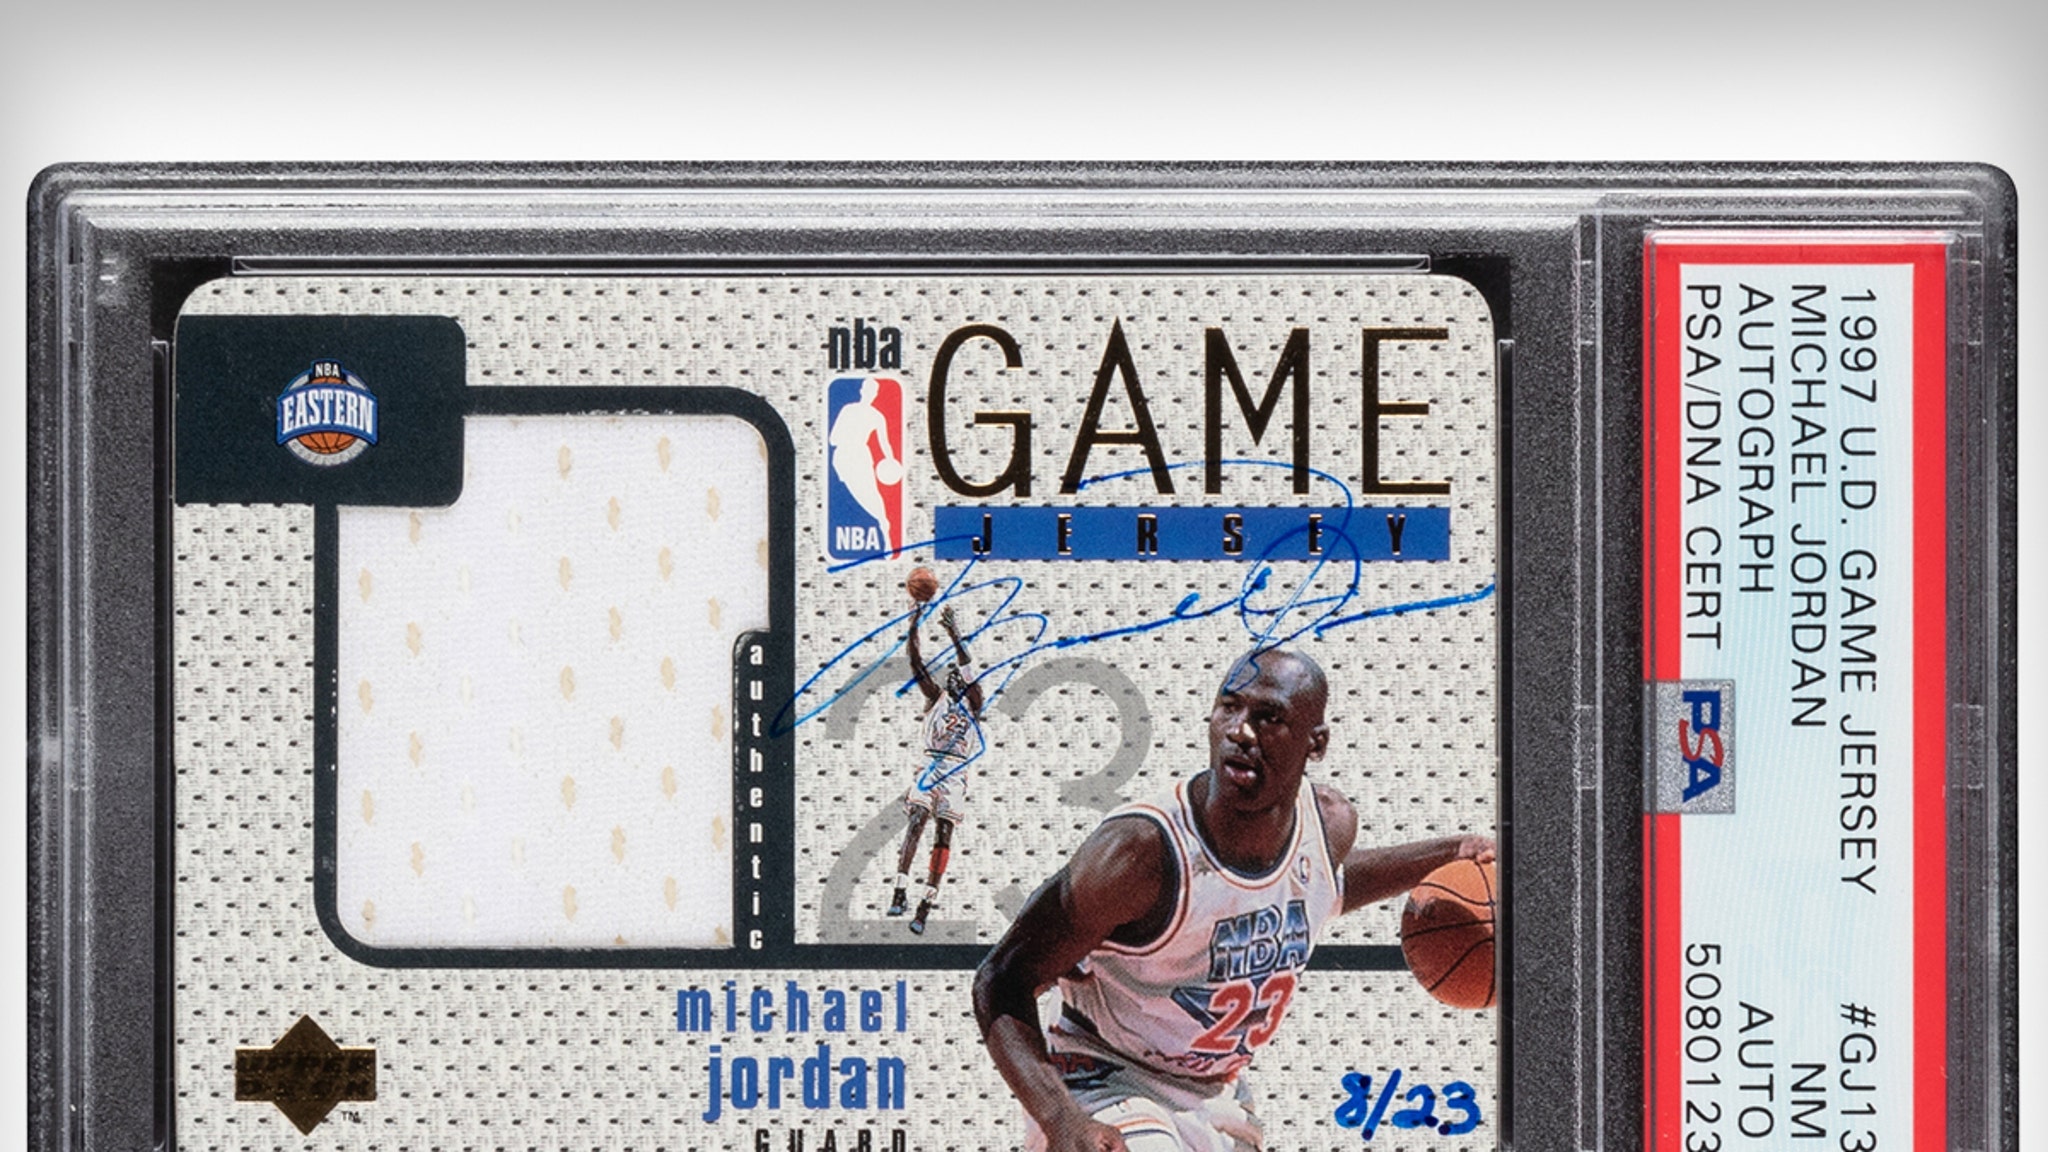 Michael Jordan-autographed trading card sells for record $2.7 million